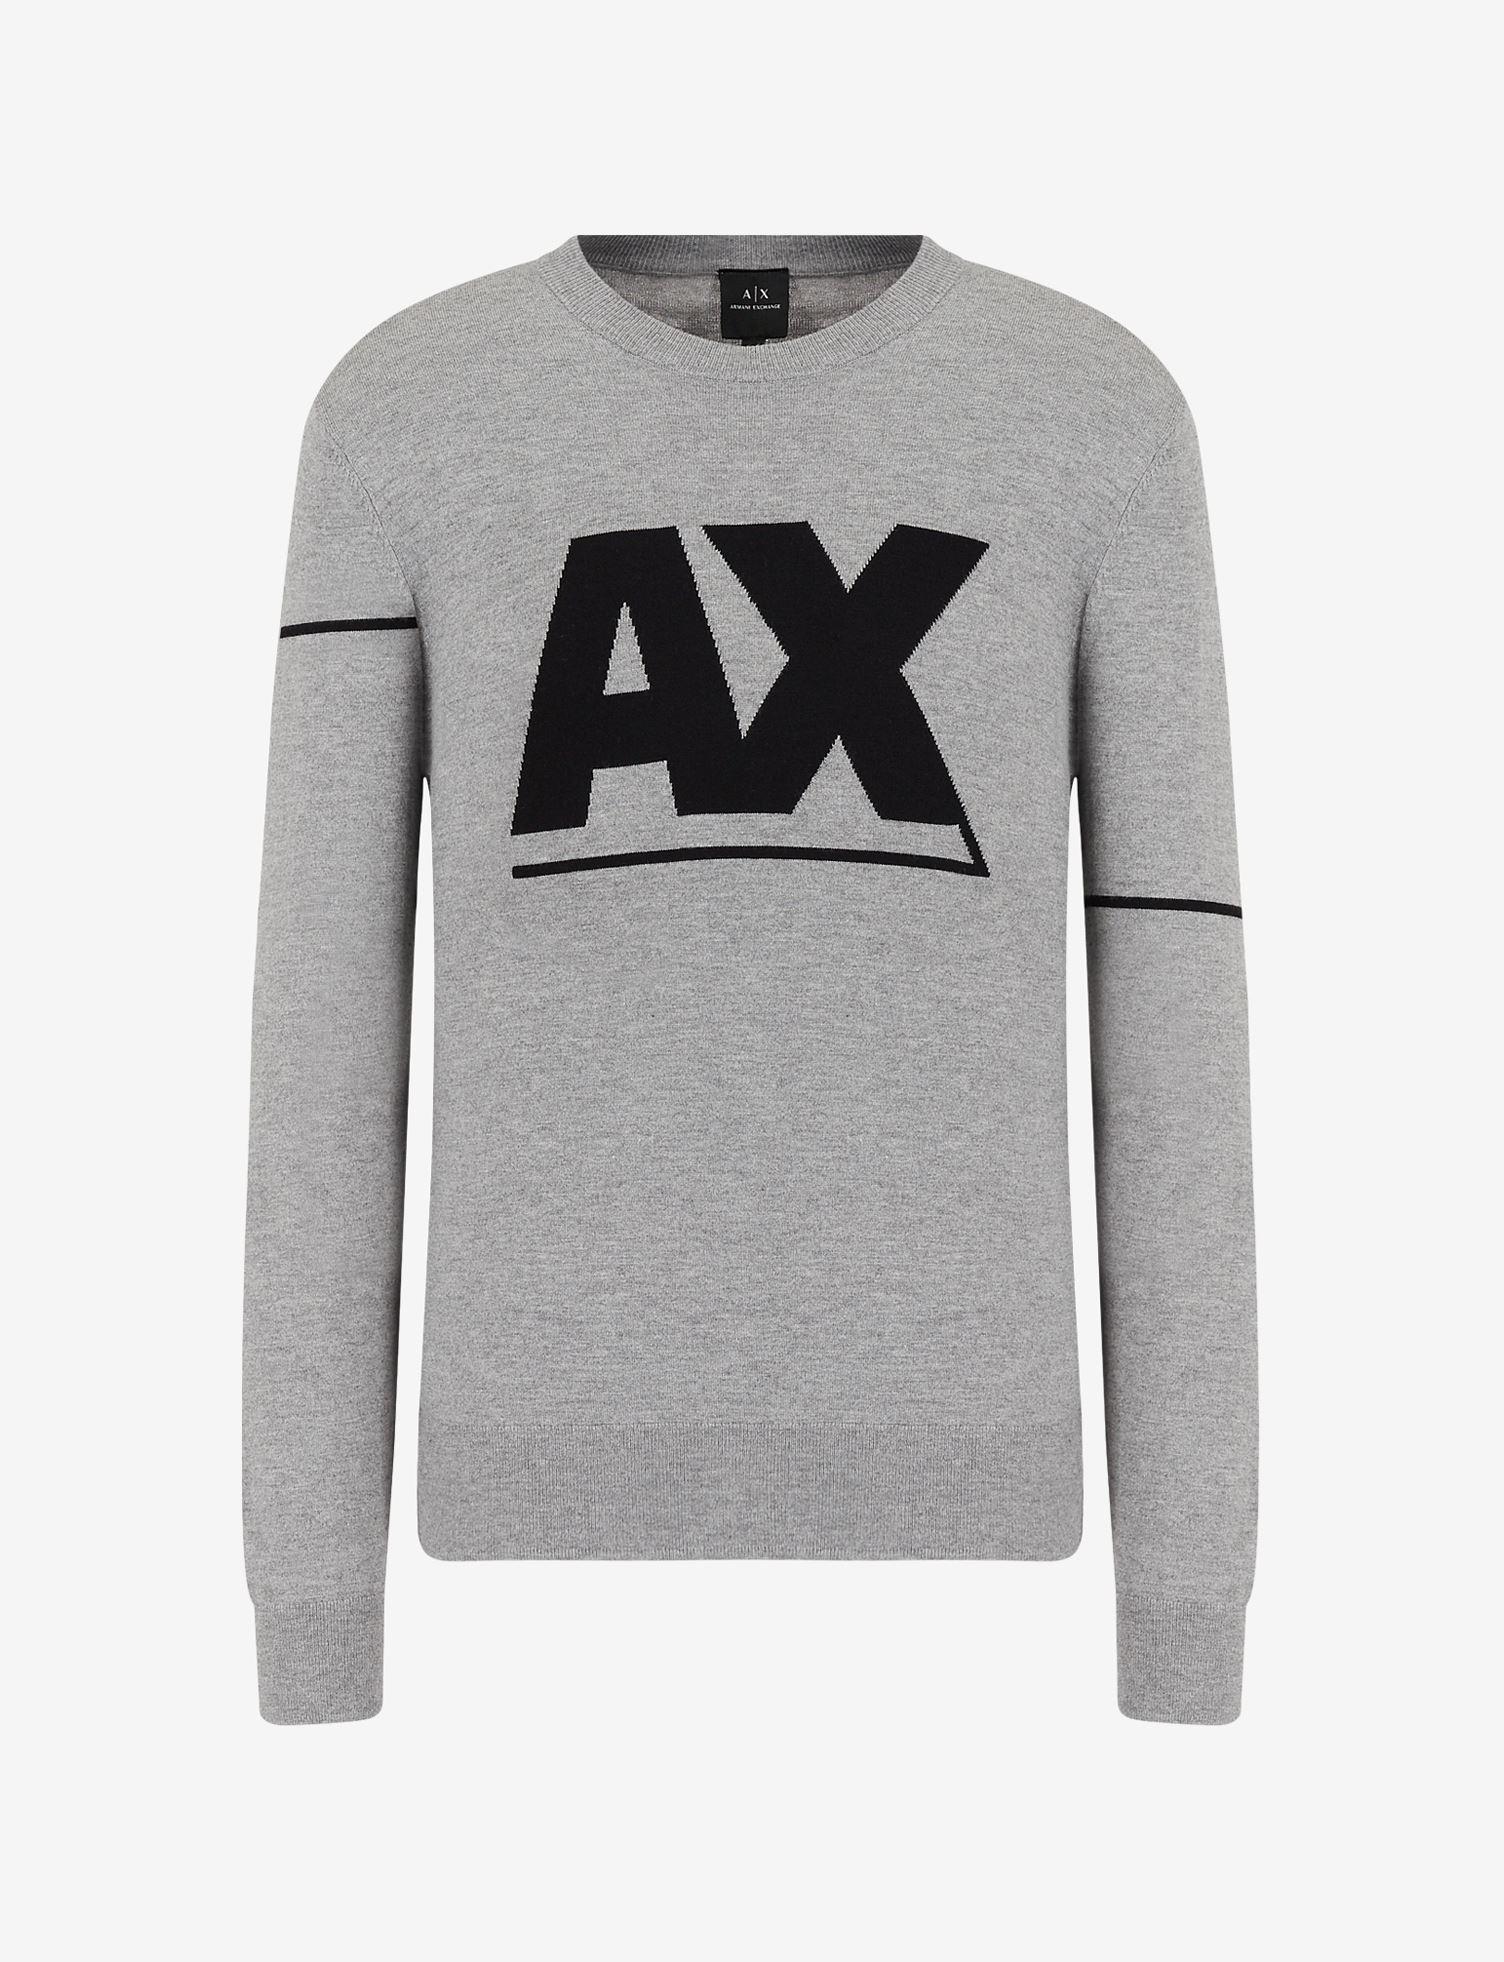 Armani Exchange Synthetic Crew Neck in Grey (Gray) for Men - Lyst